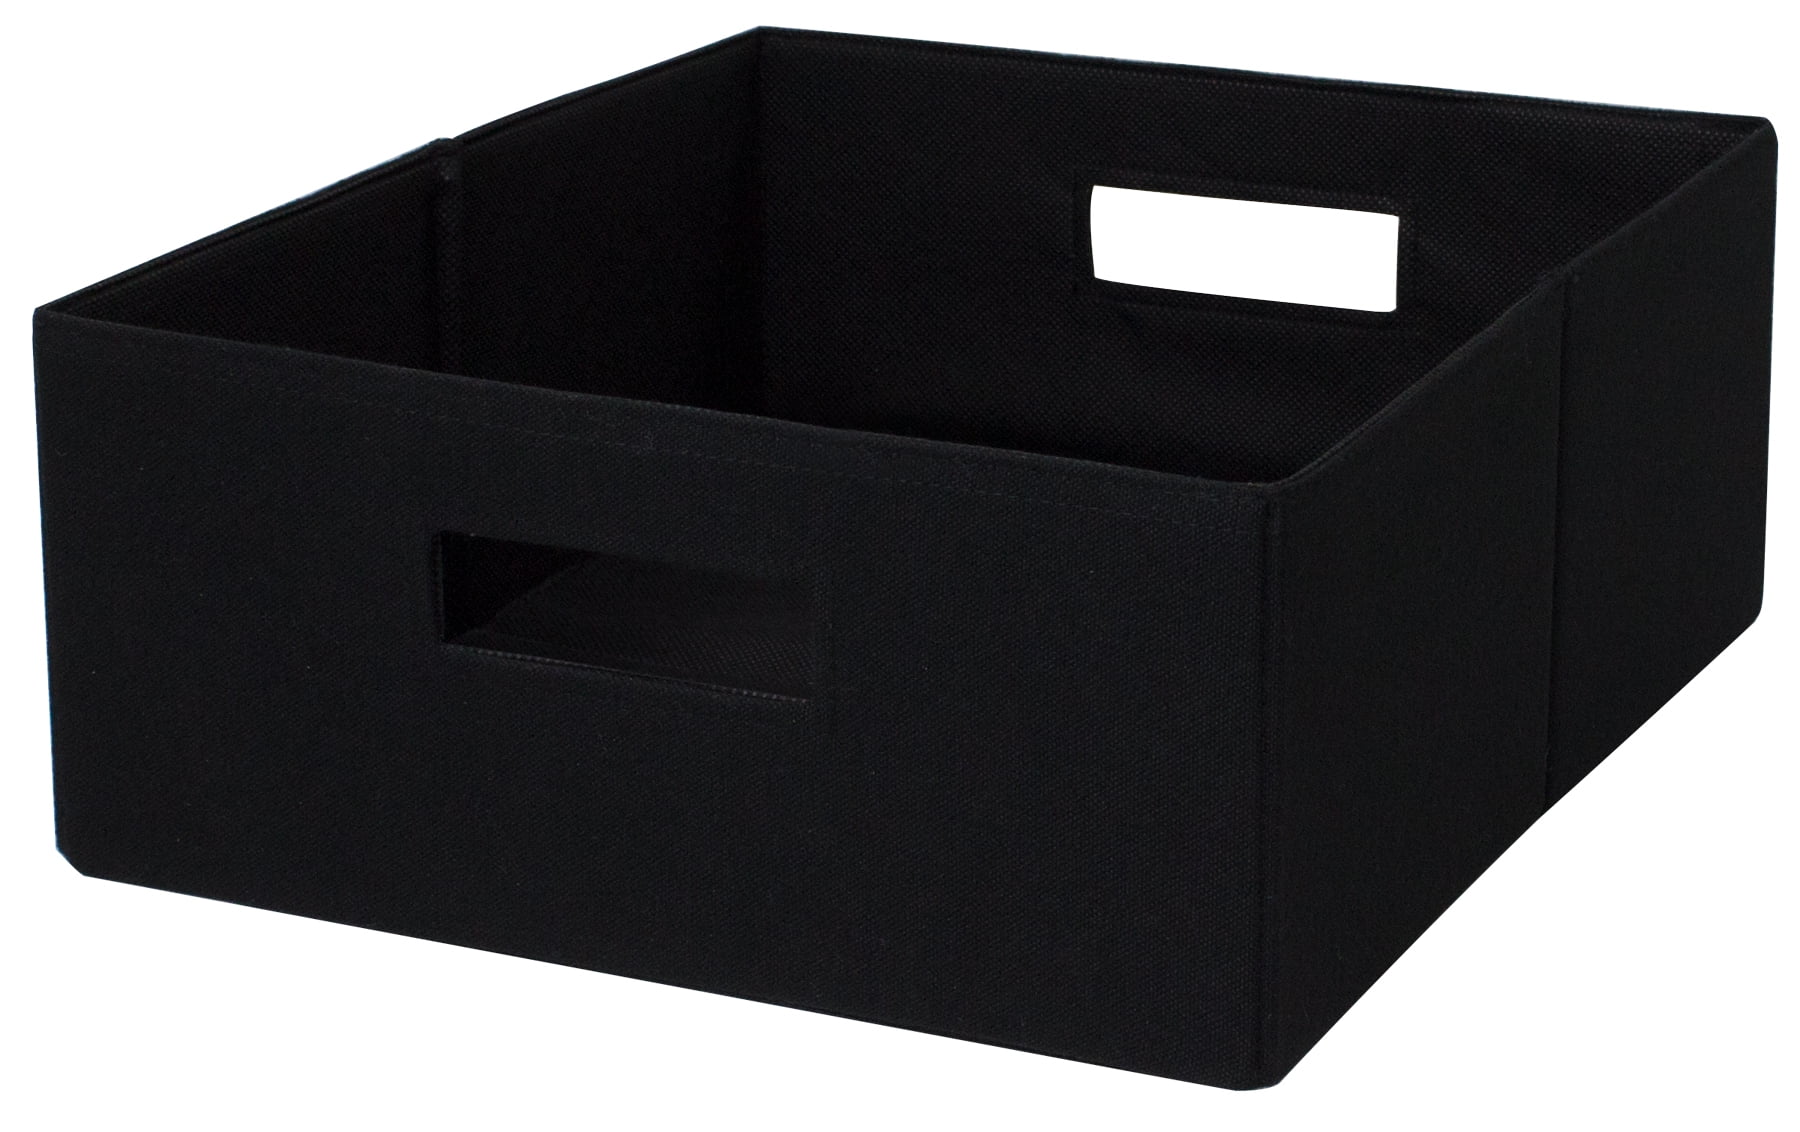 shelves with storage bins 4209 - Plastic containers supplier